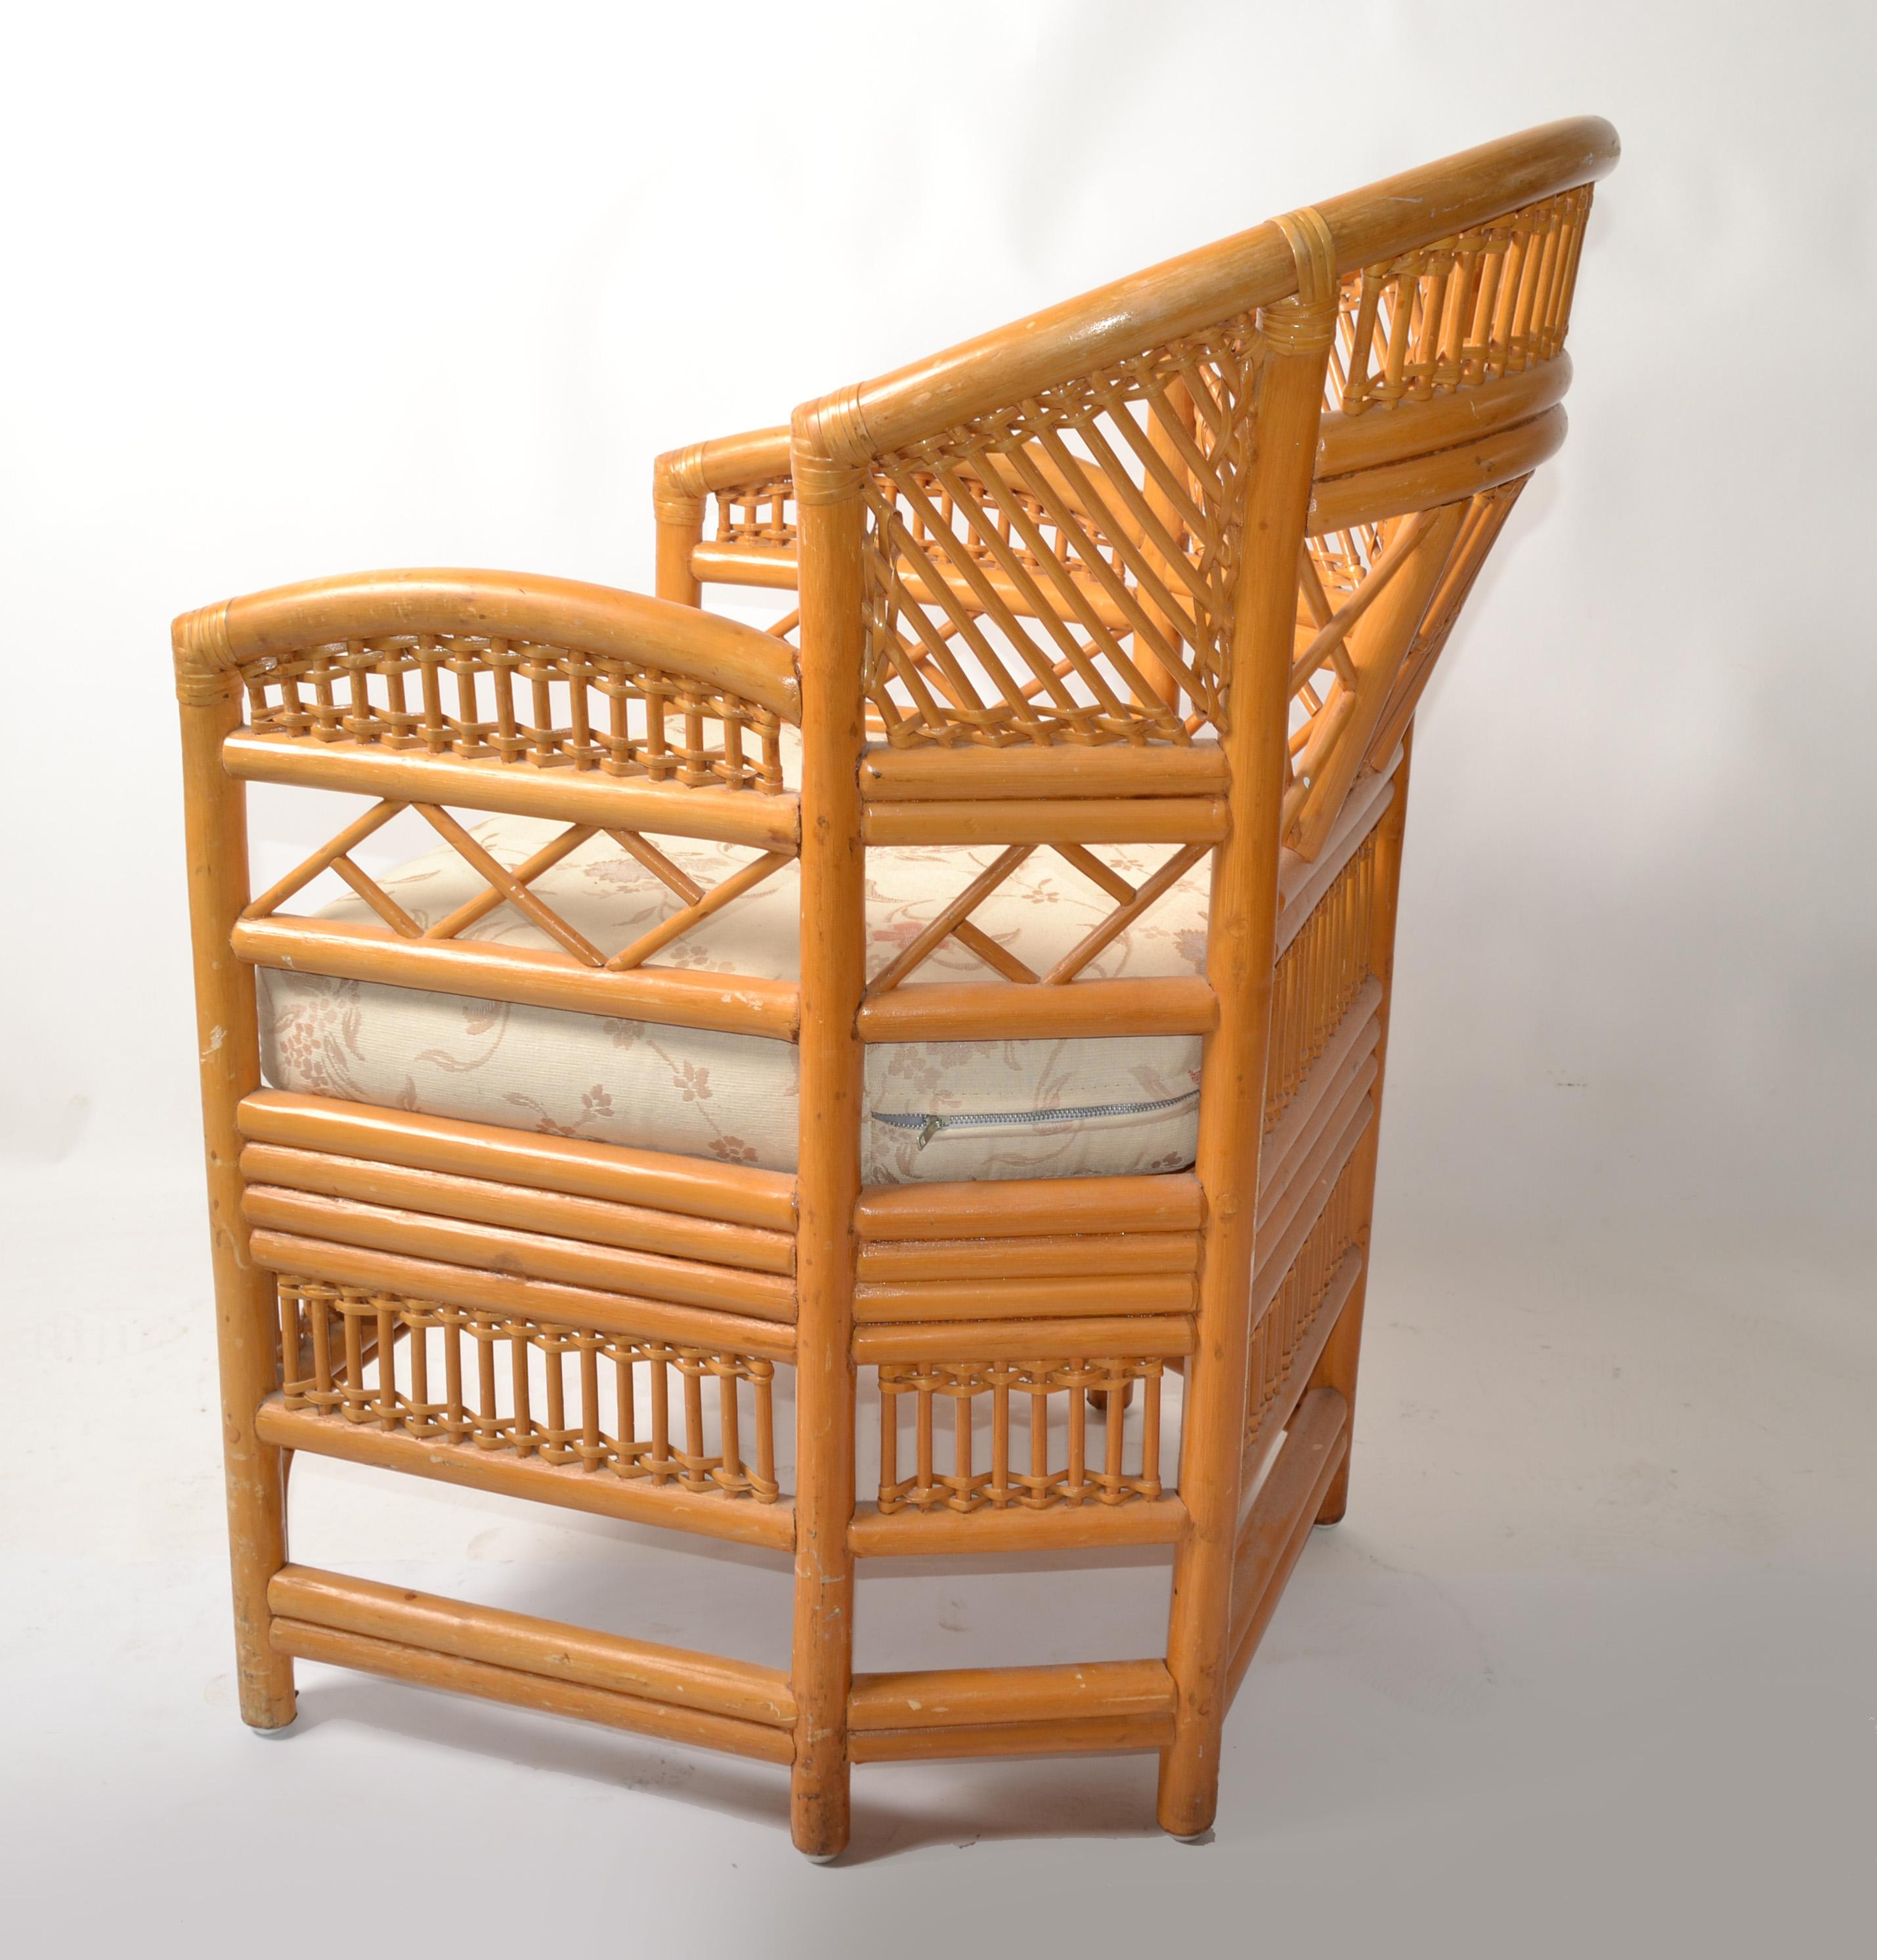 Philippine Vintage Brighton Chinoiserie Rattan Blonde Bamboo Caning Split Reed Armchair 70s For Sale